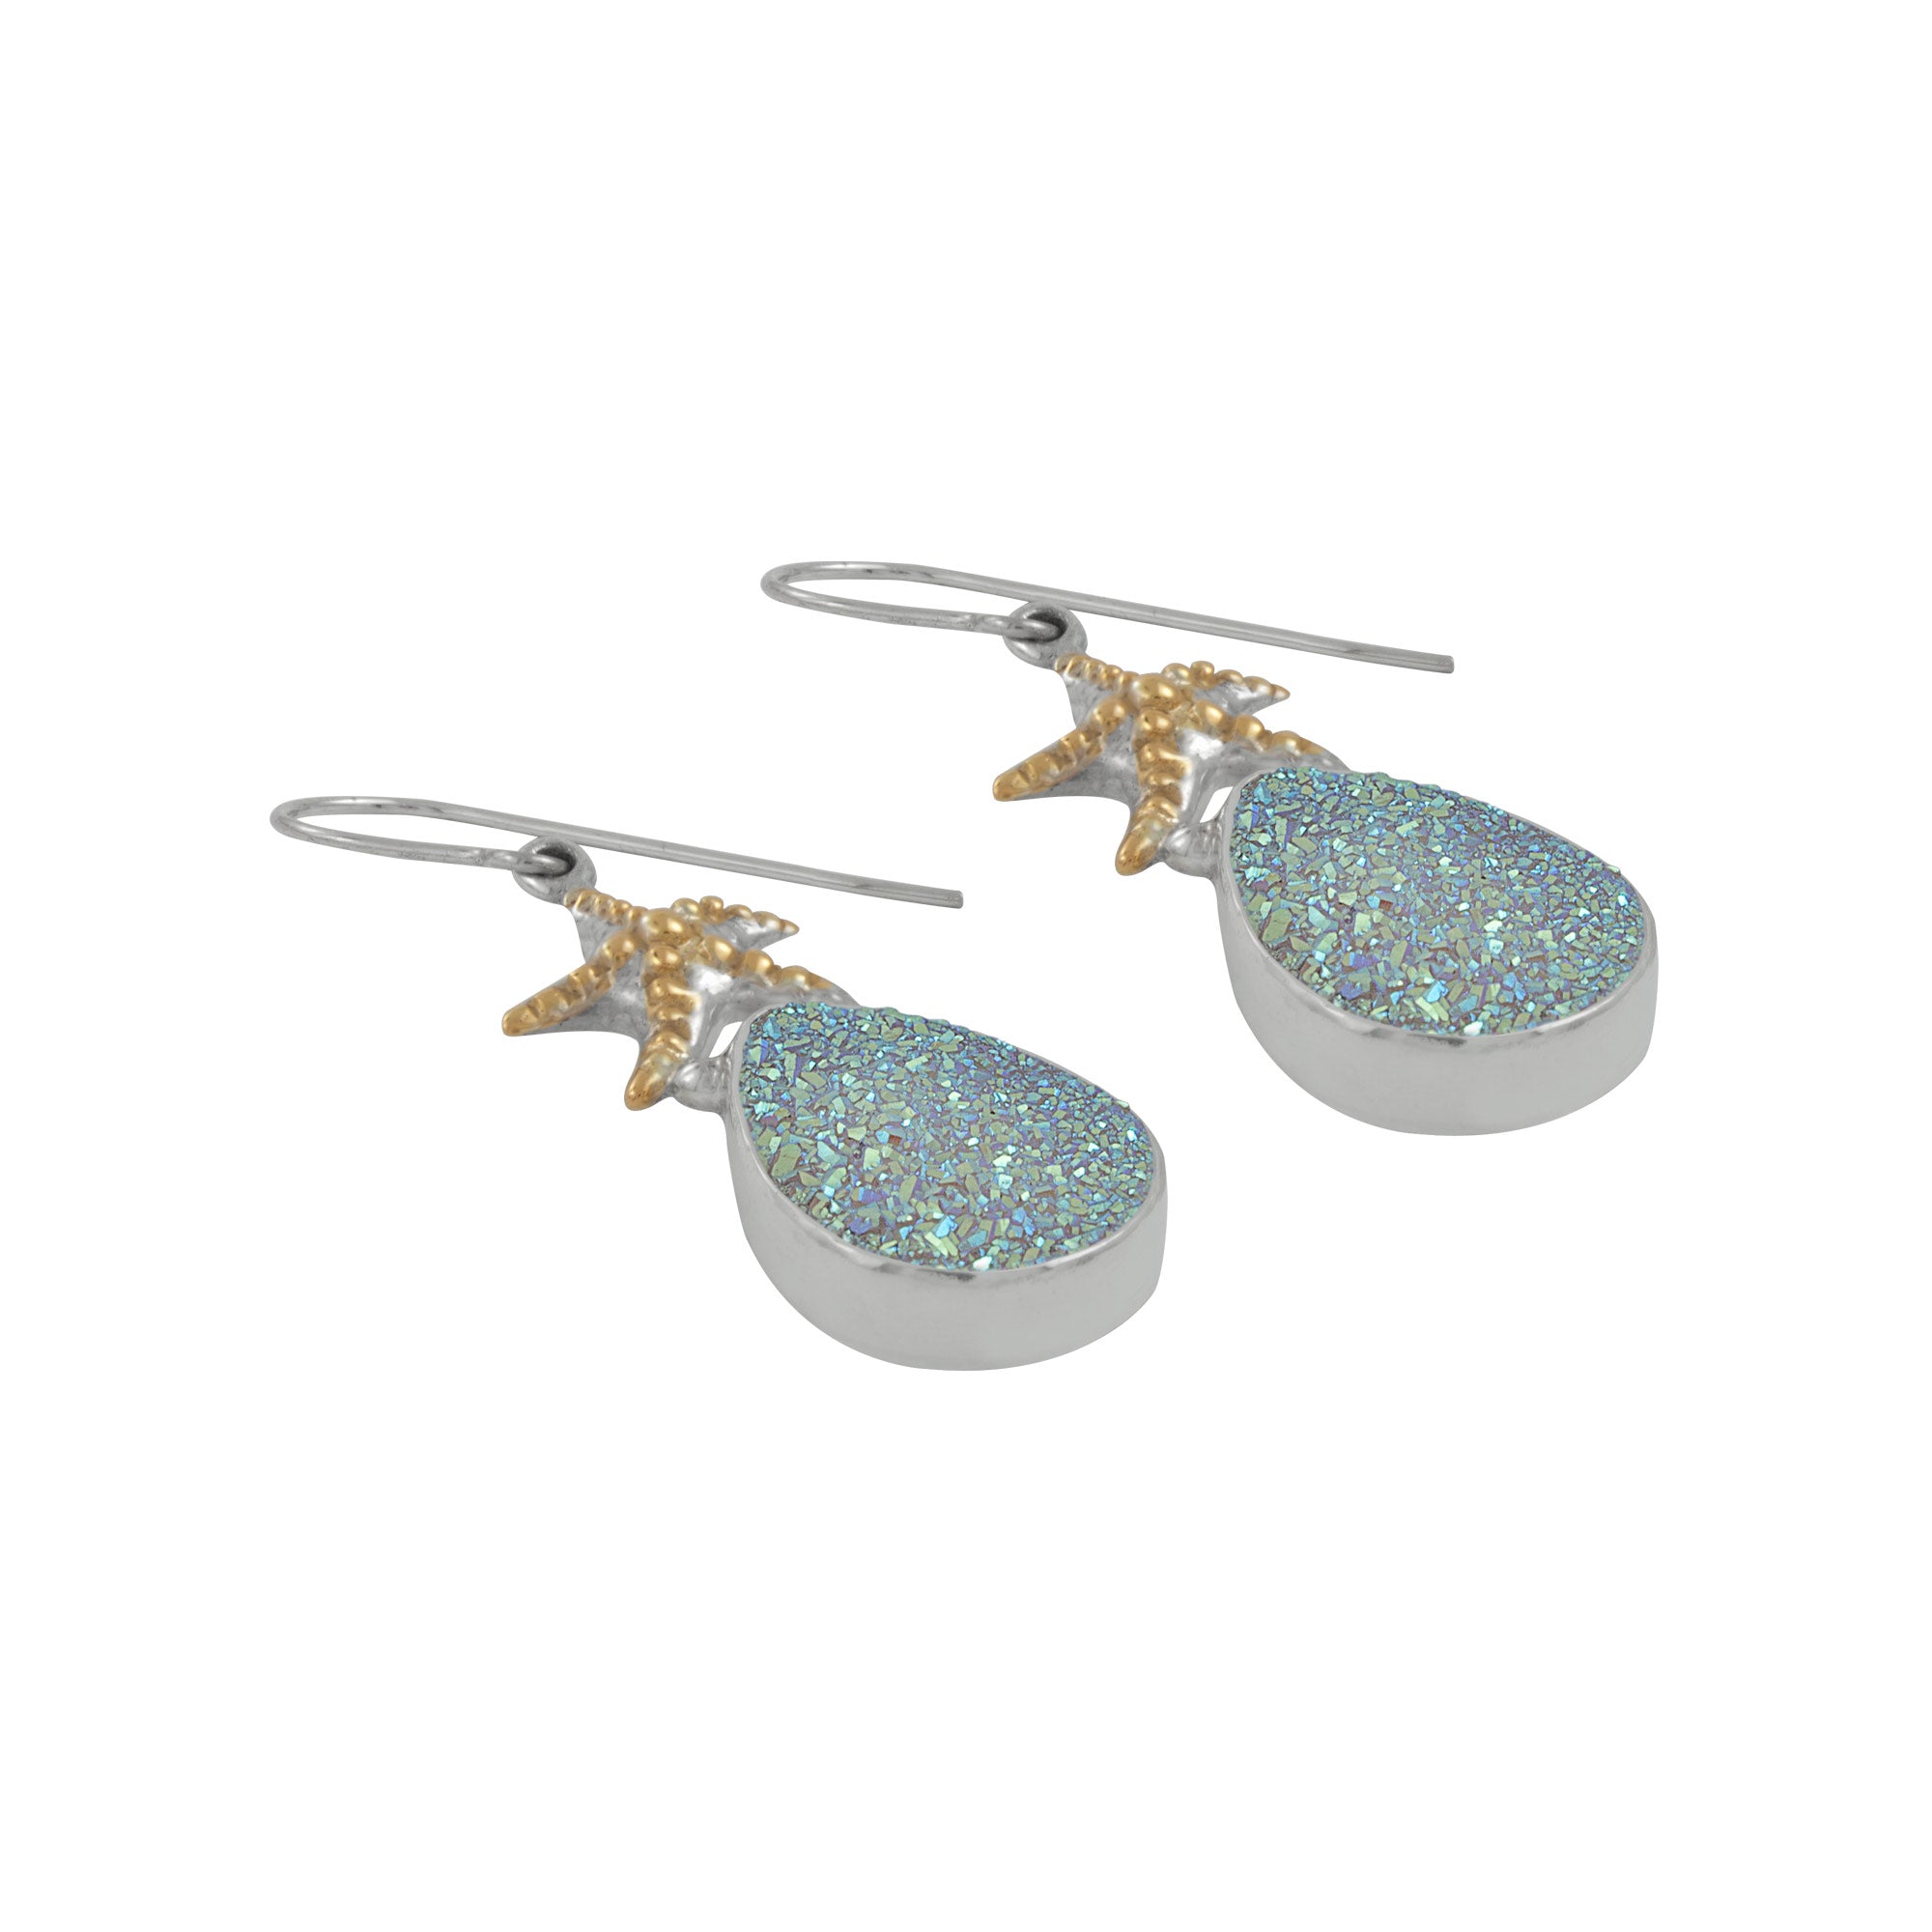 Silver Starfish Druze earring dazzling sparkle gives this Druzy earring a sensational shimmer